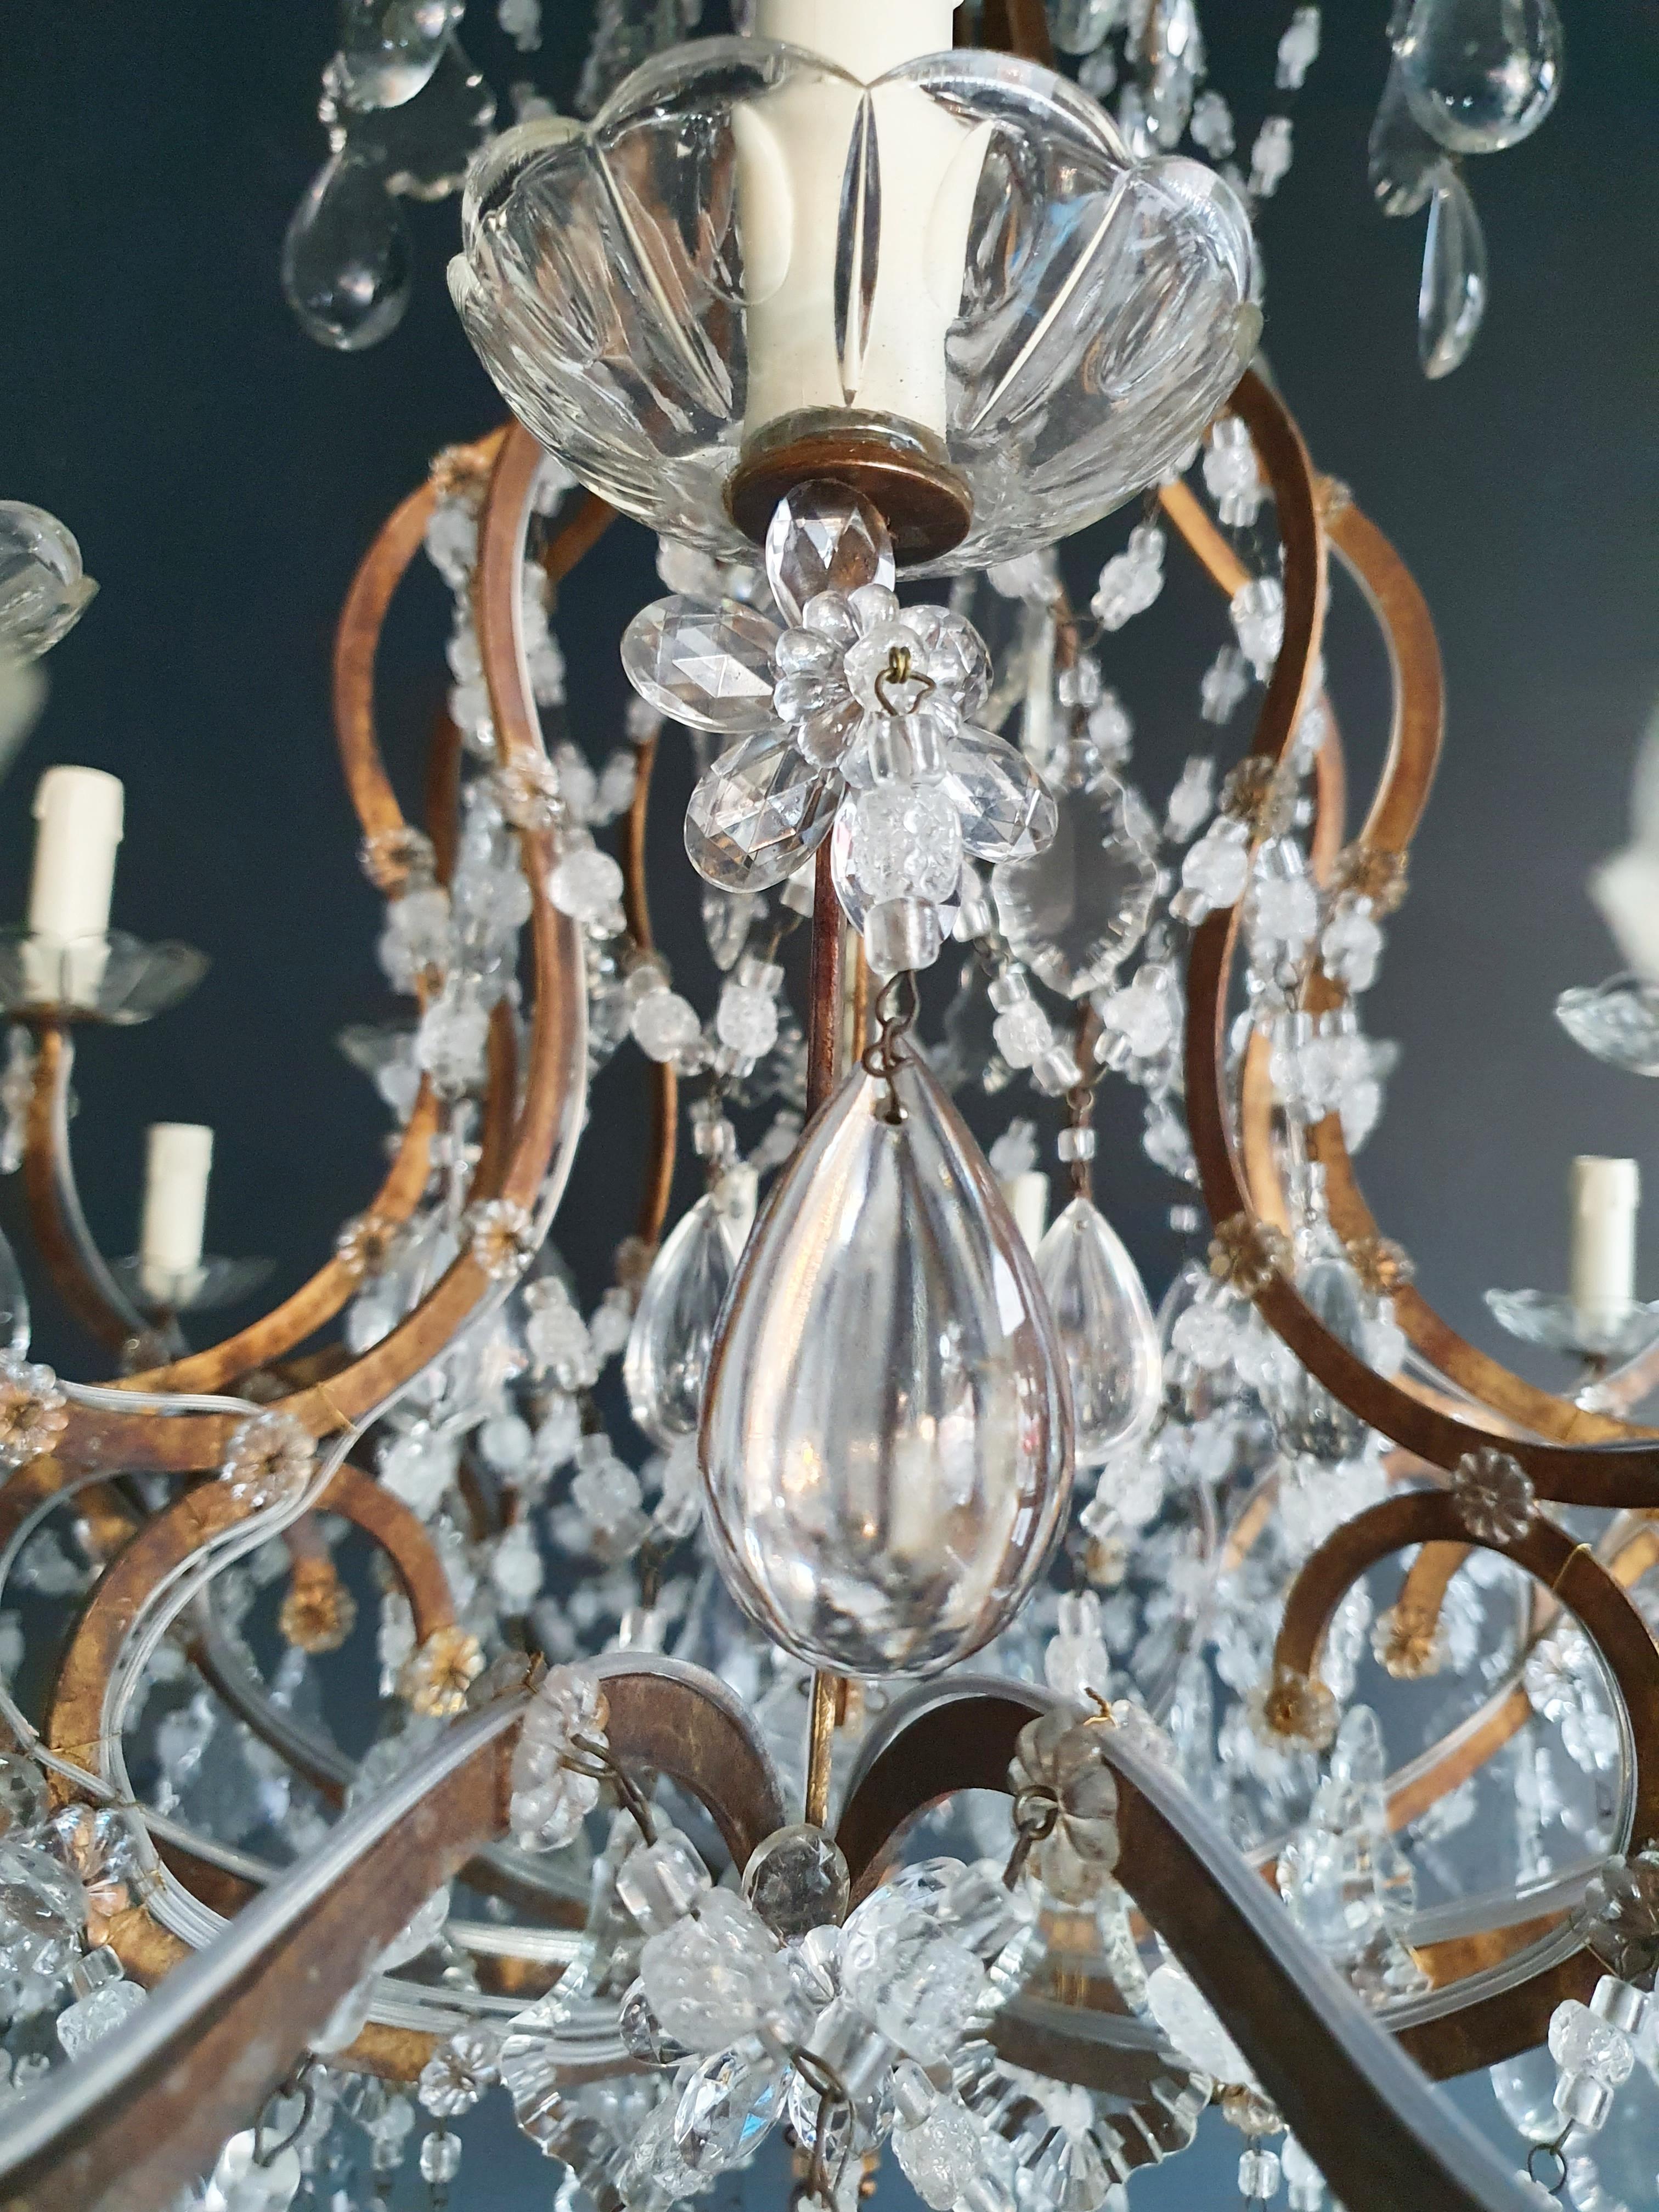 18th Century Huge Candelabrum Crystal Antique Chandelier Classic traditional Massive Wide For Sale